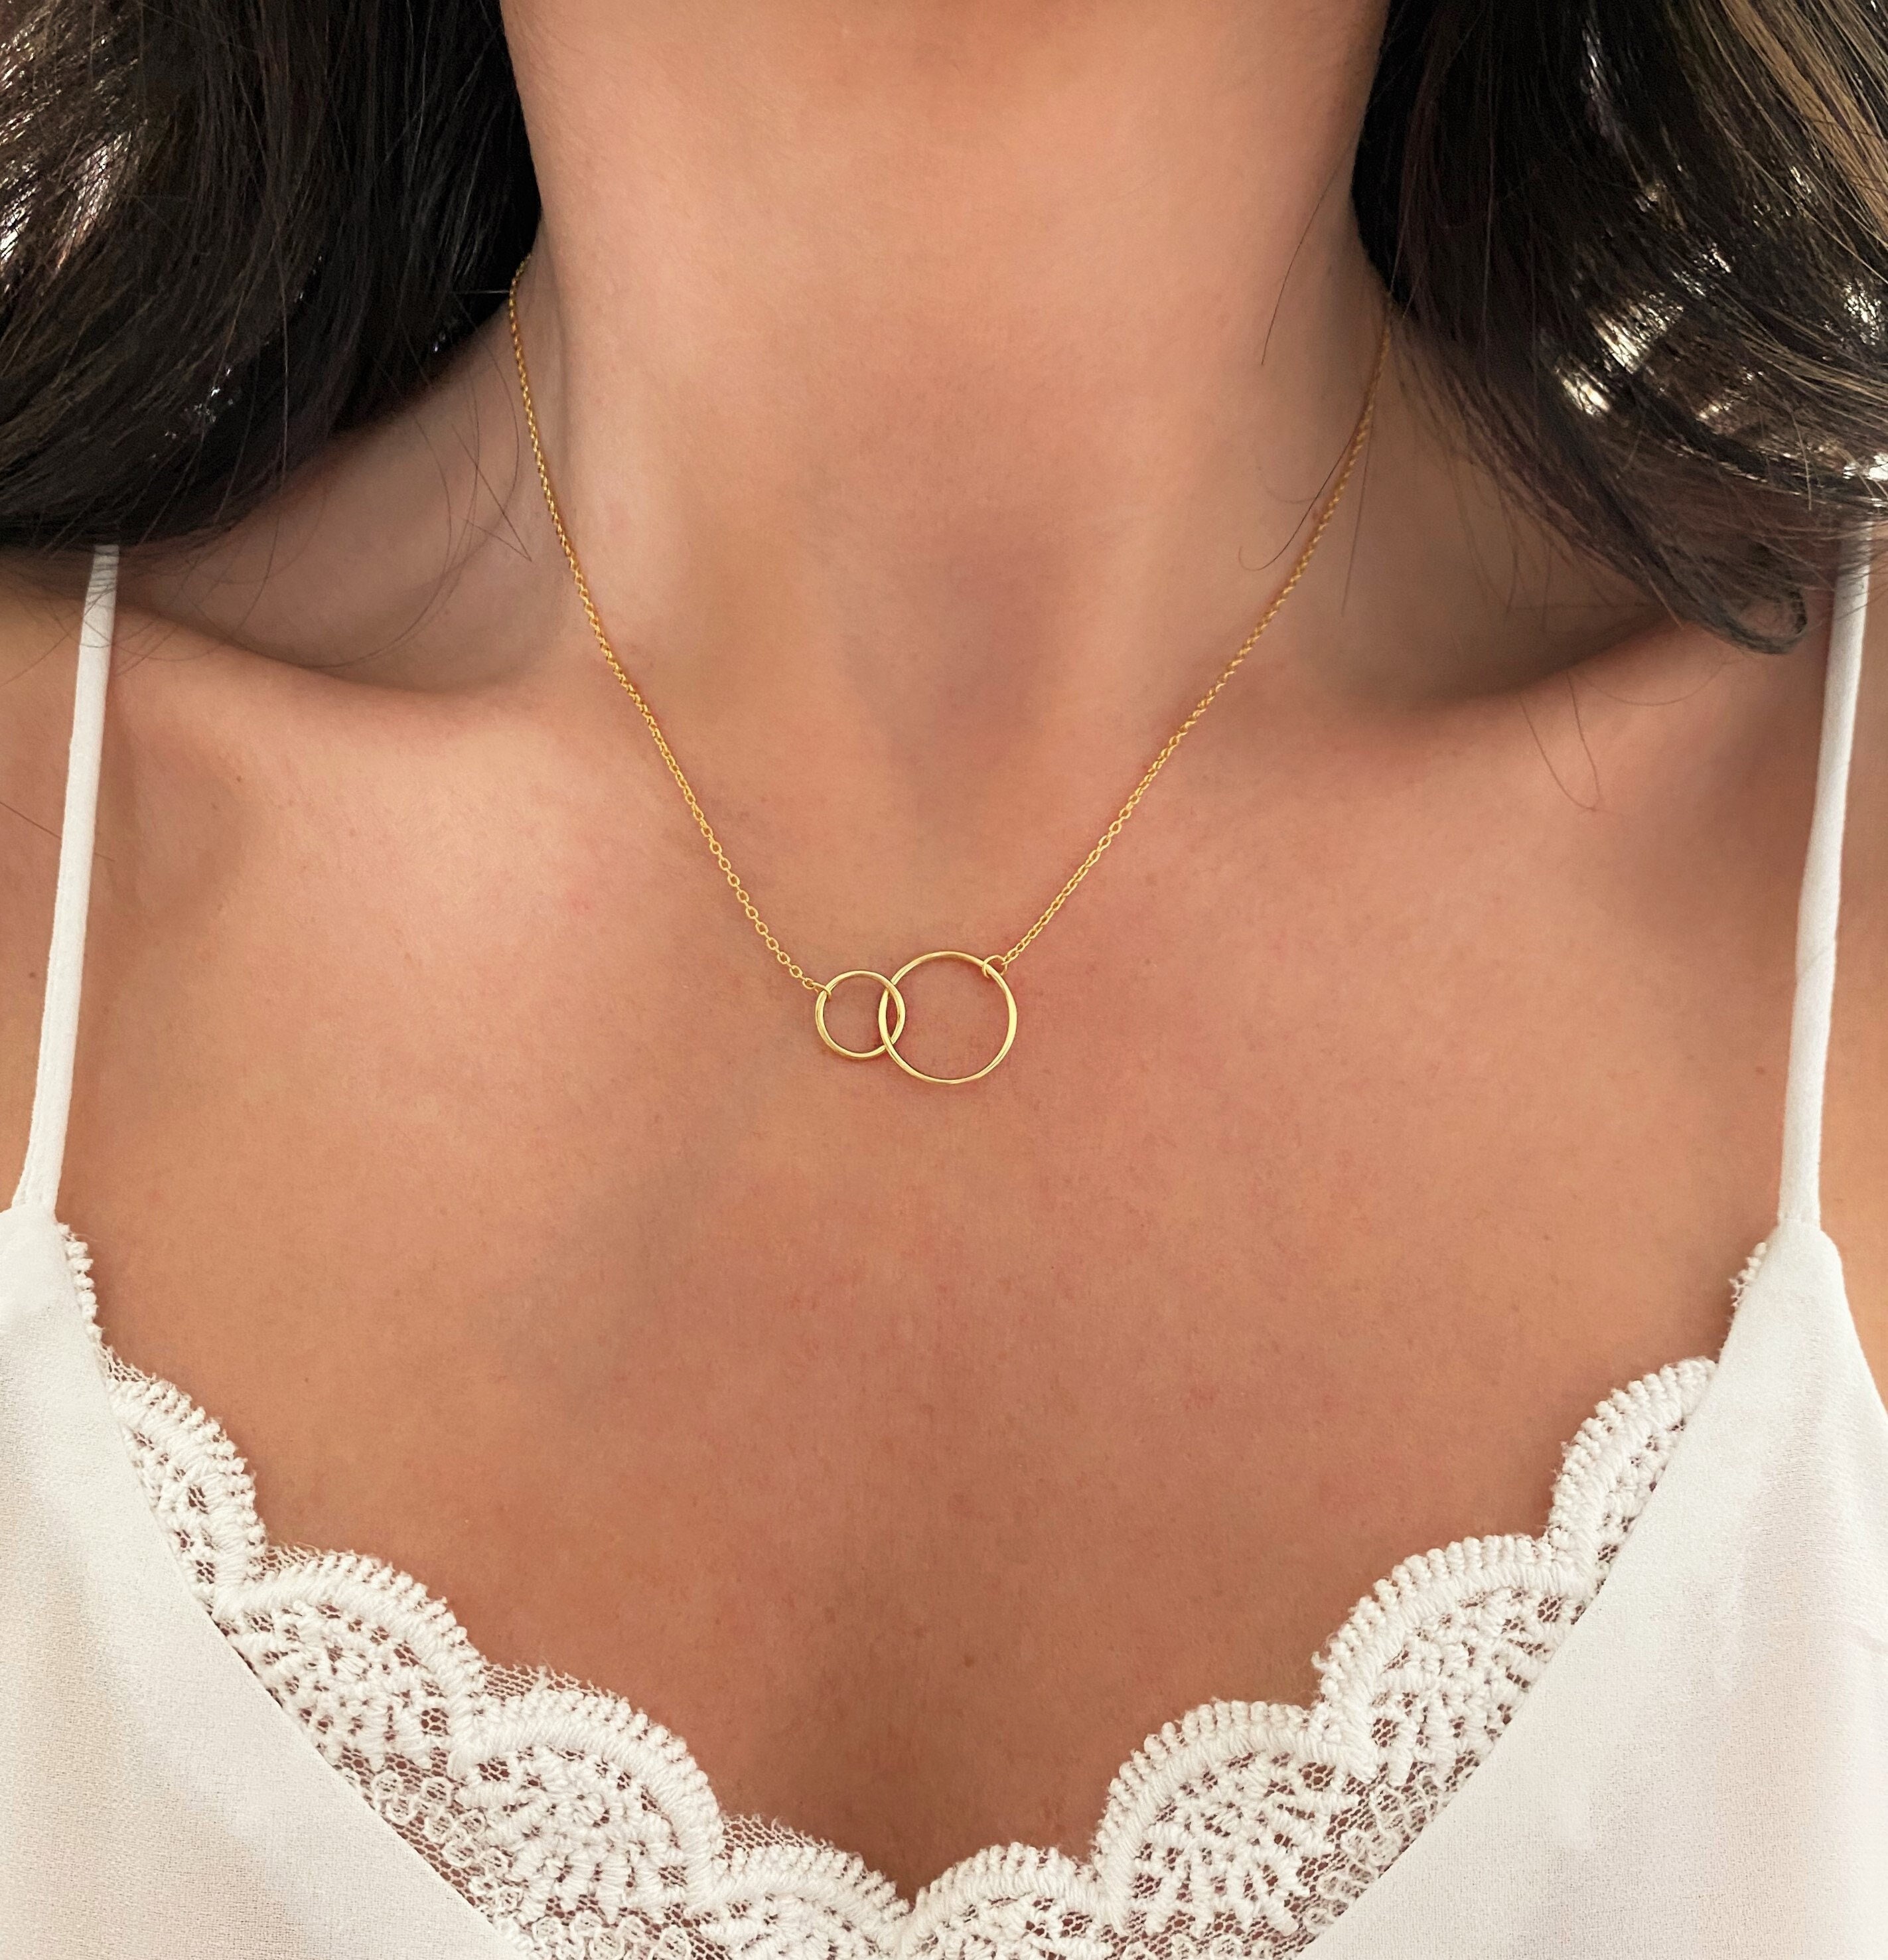 August Woods Rose Gold Interlinked Circles Necklace Argento.com